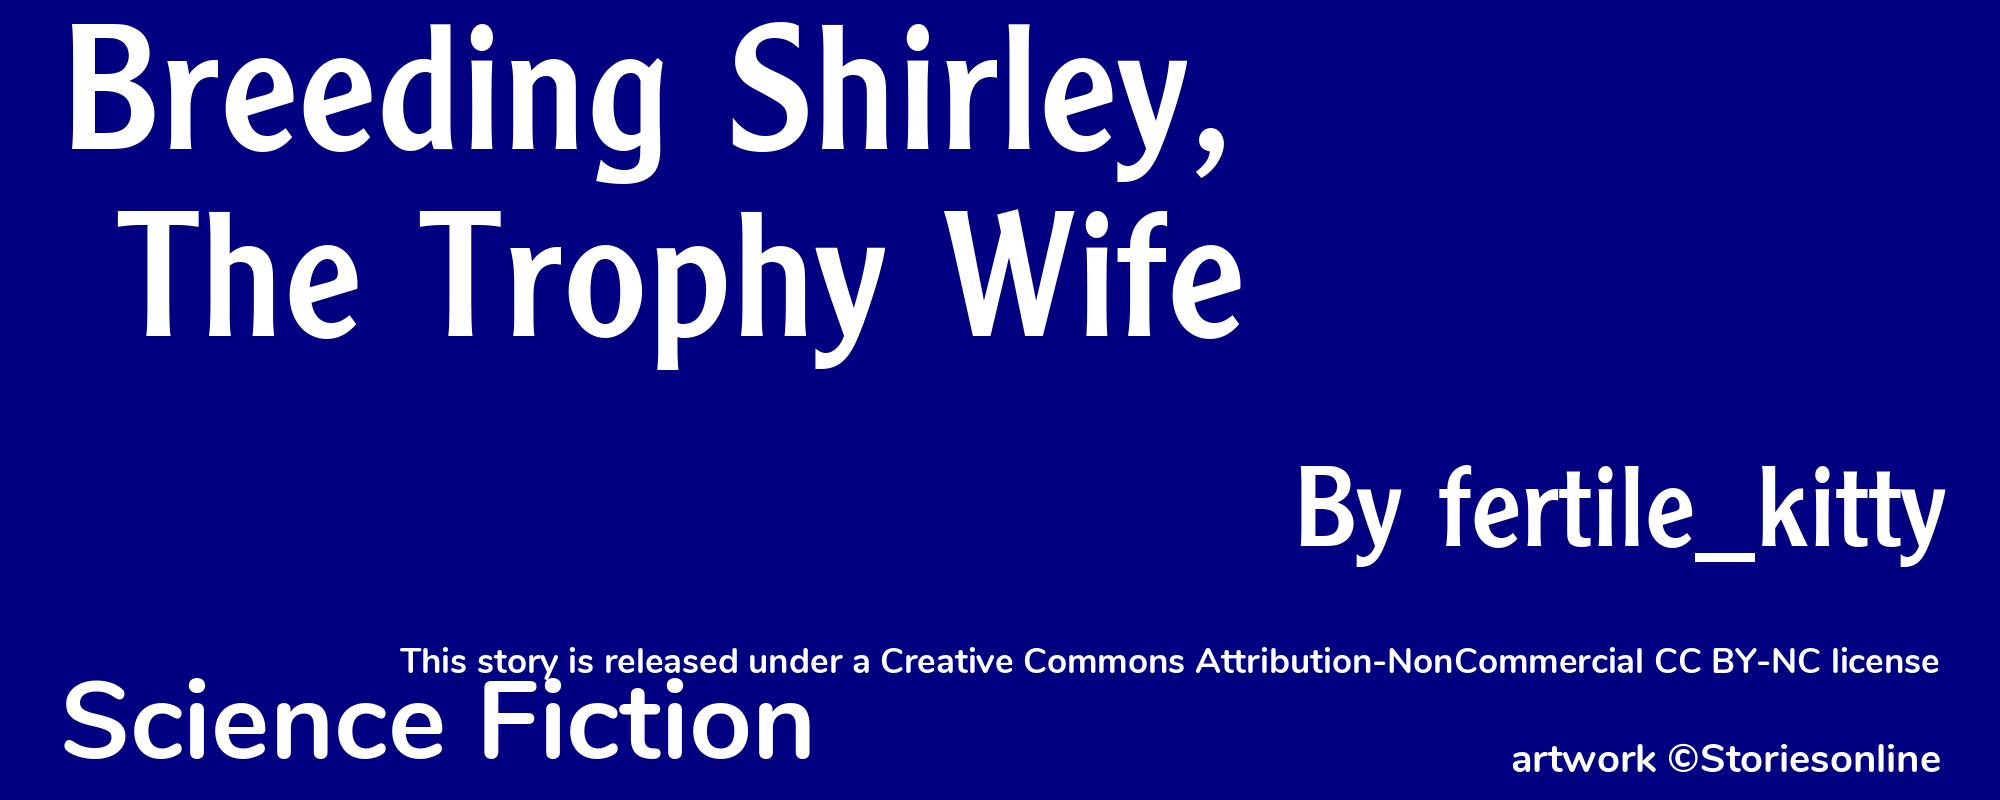 Breeding Shirley, The Trophy Wife - Cover